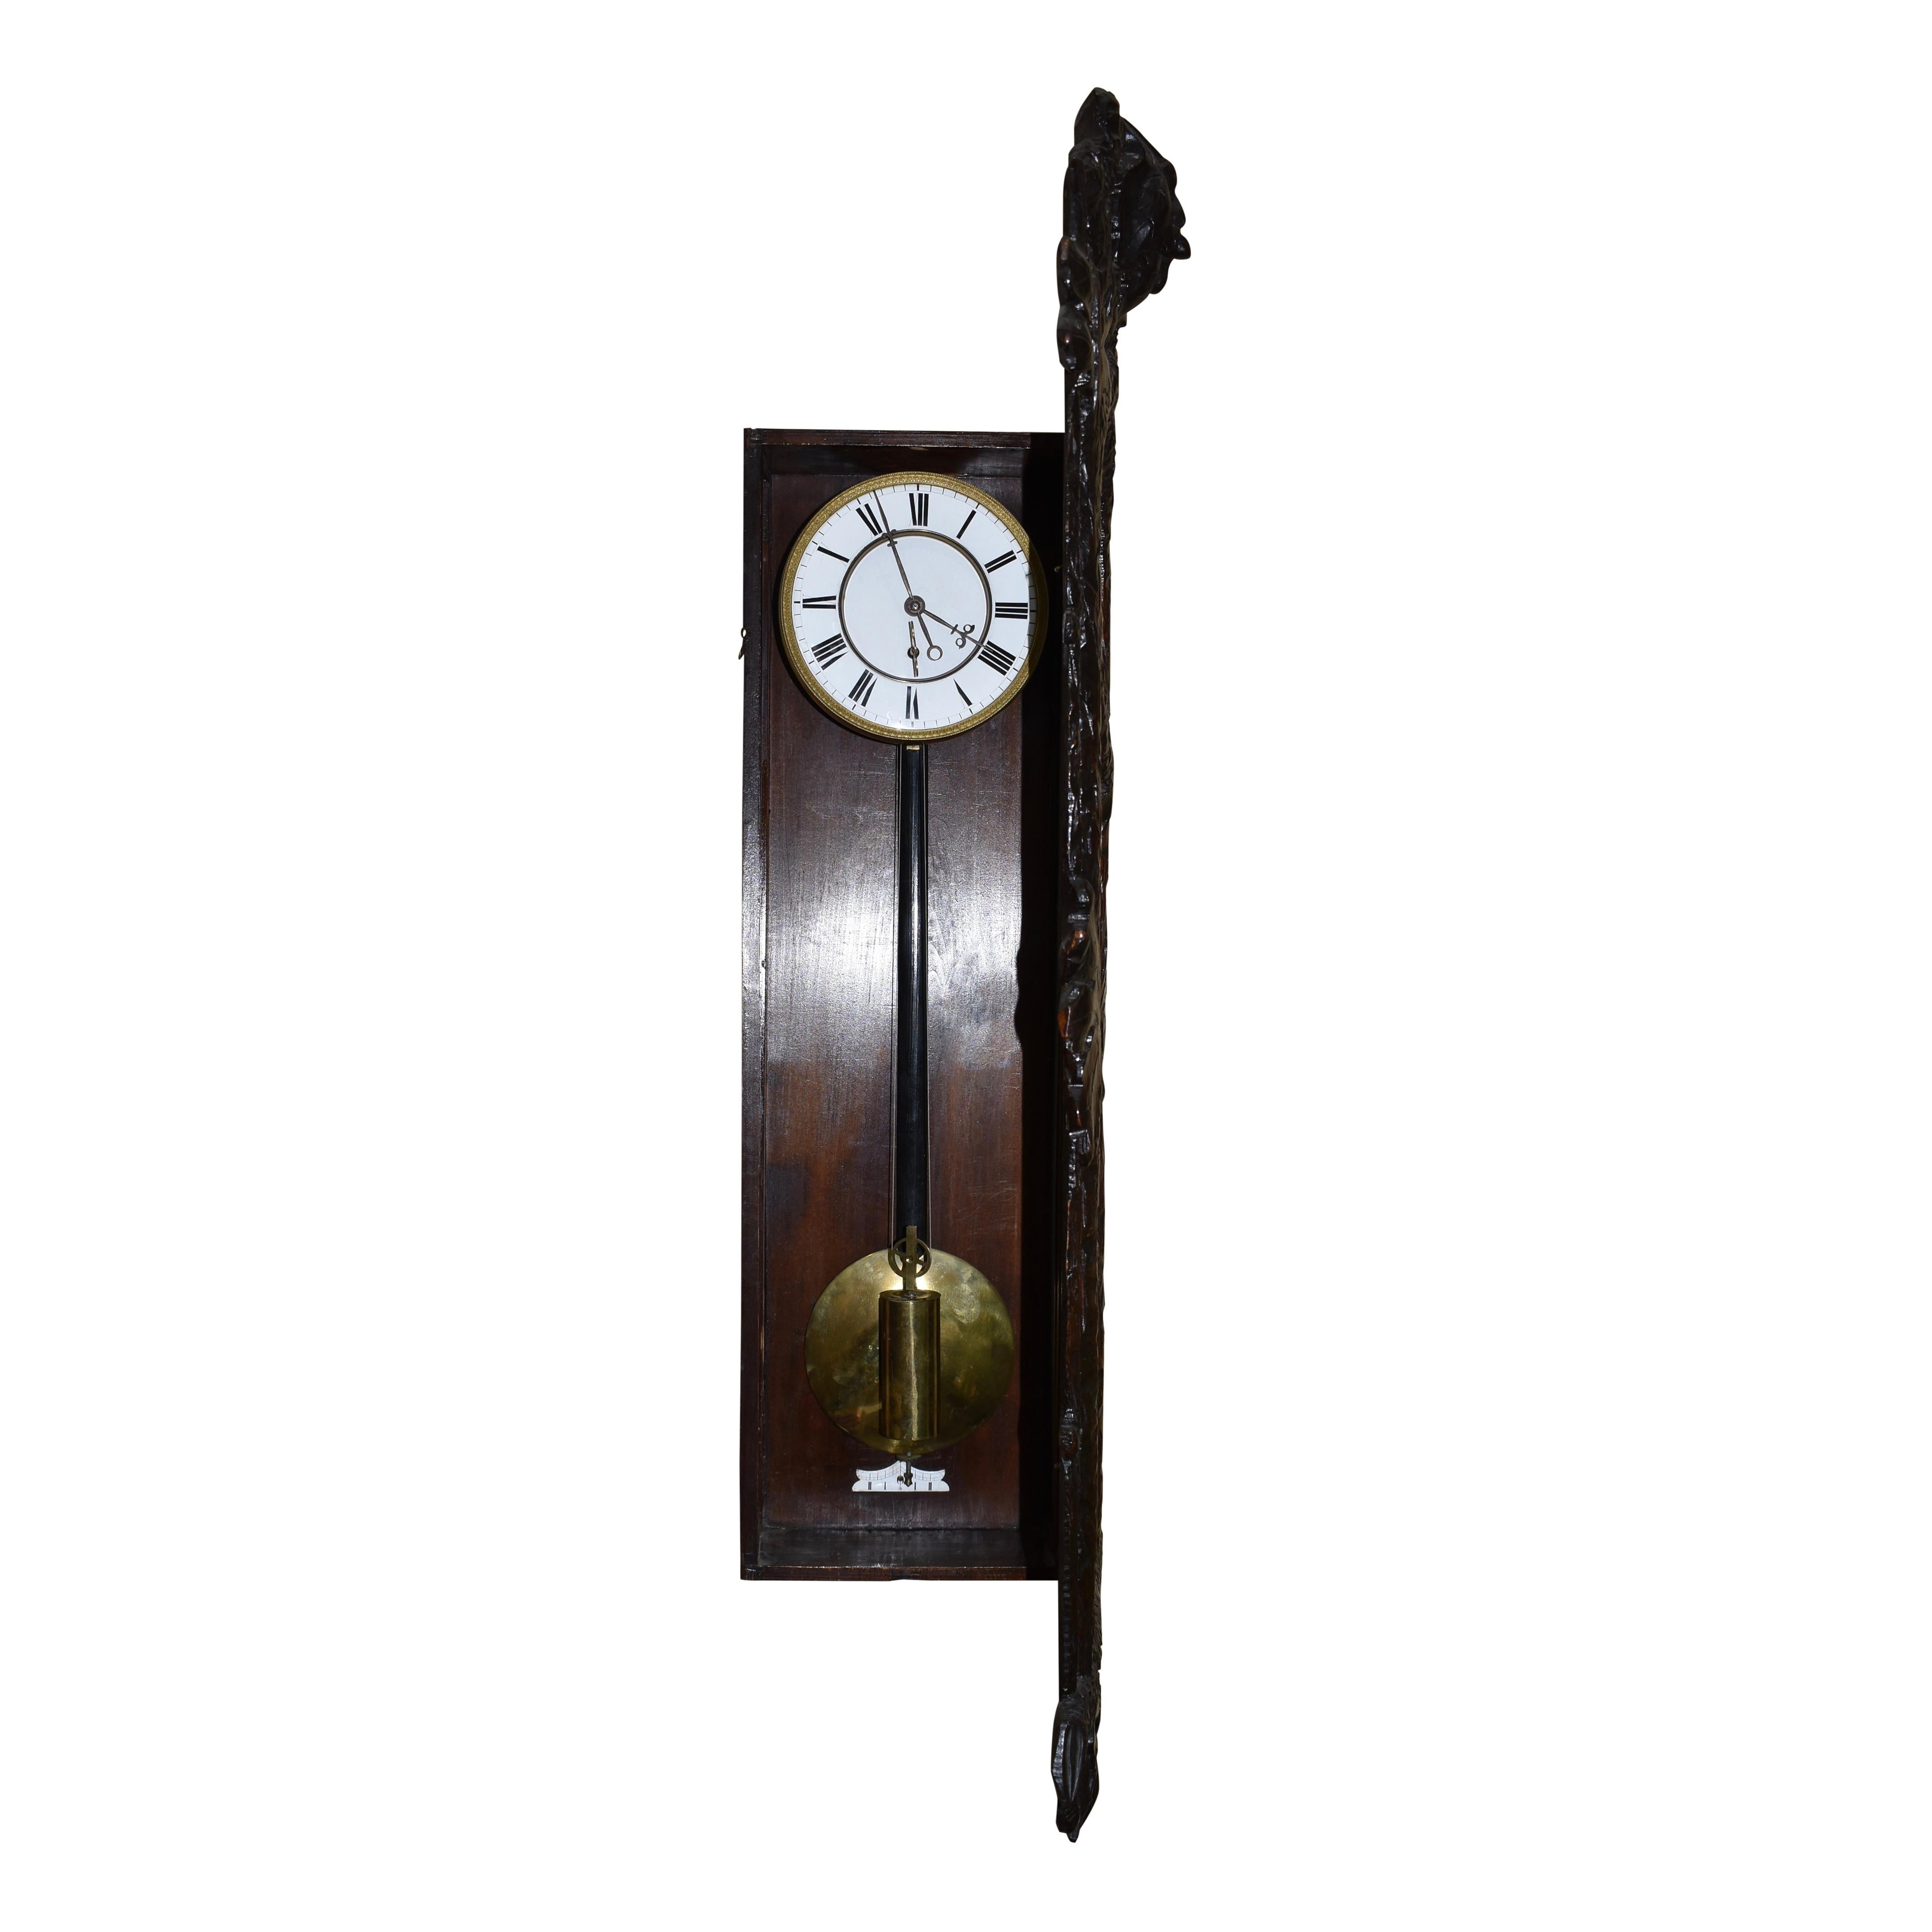 Late 19th century Vienna regulator single weight wall clock in a carved walnut and glass case. Because of the style of case, which is unlike most cases made in Austria, it is likely the case was carved in Germany or Switzerland and then fitted with